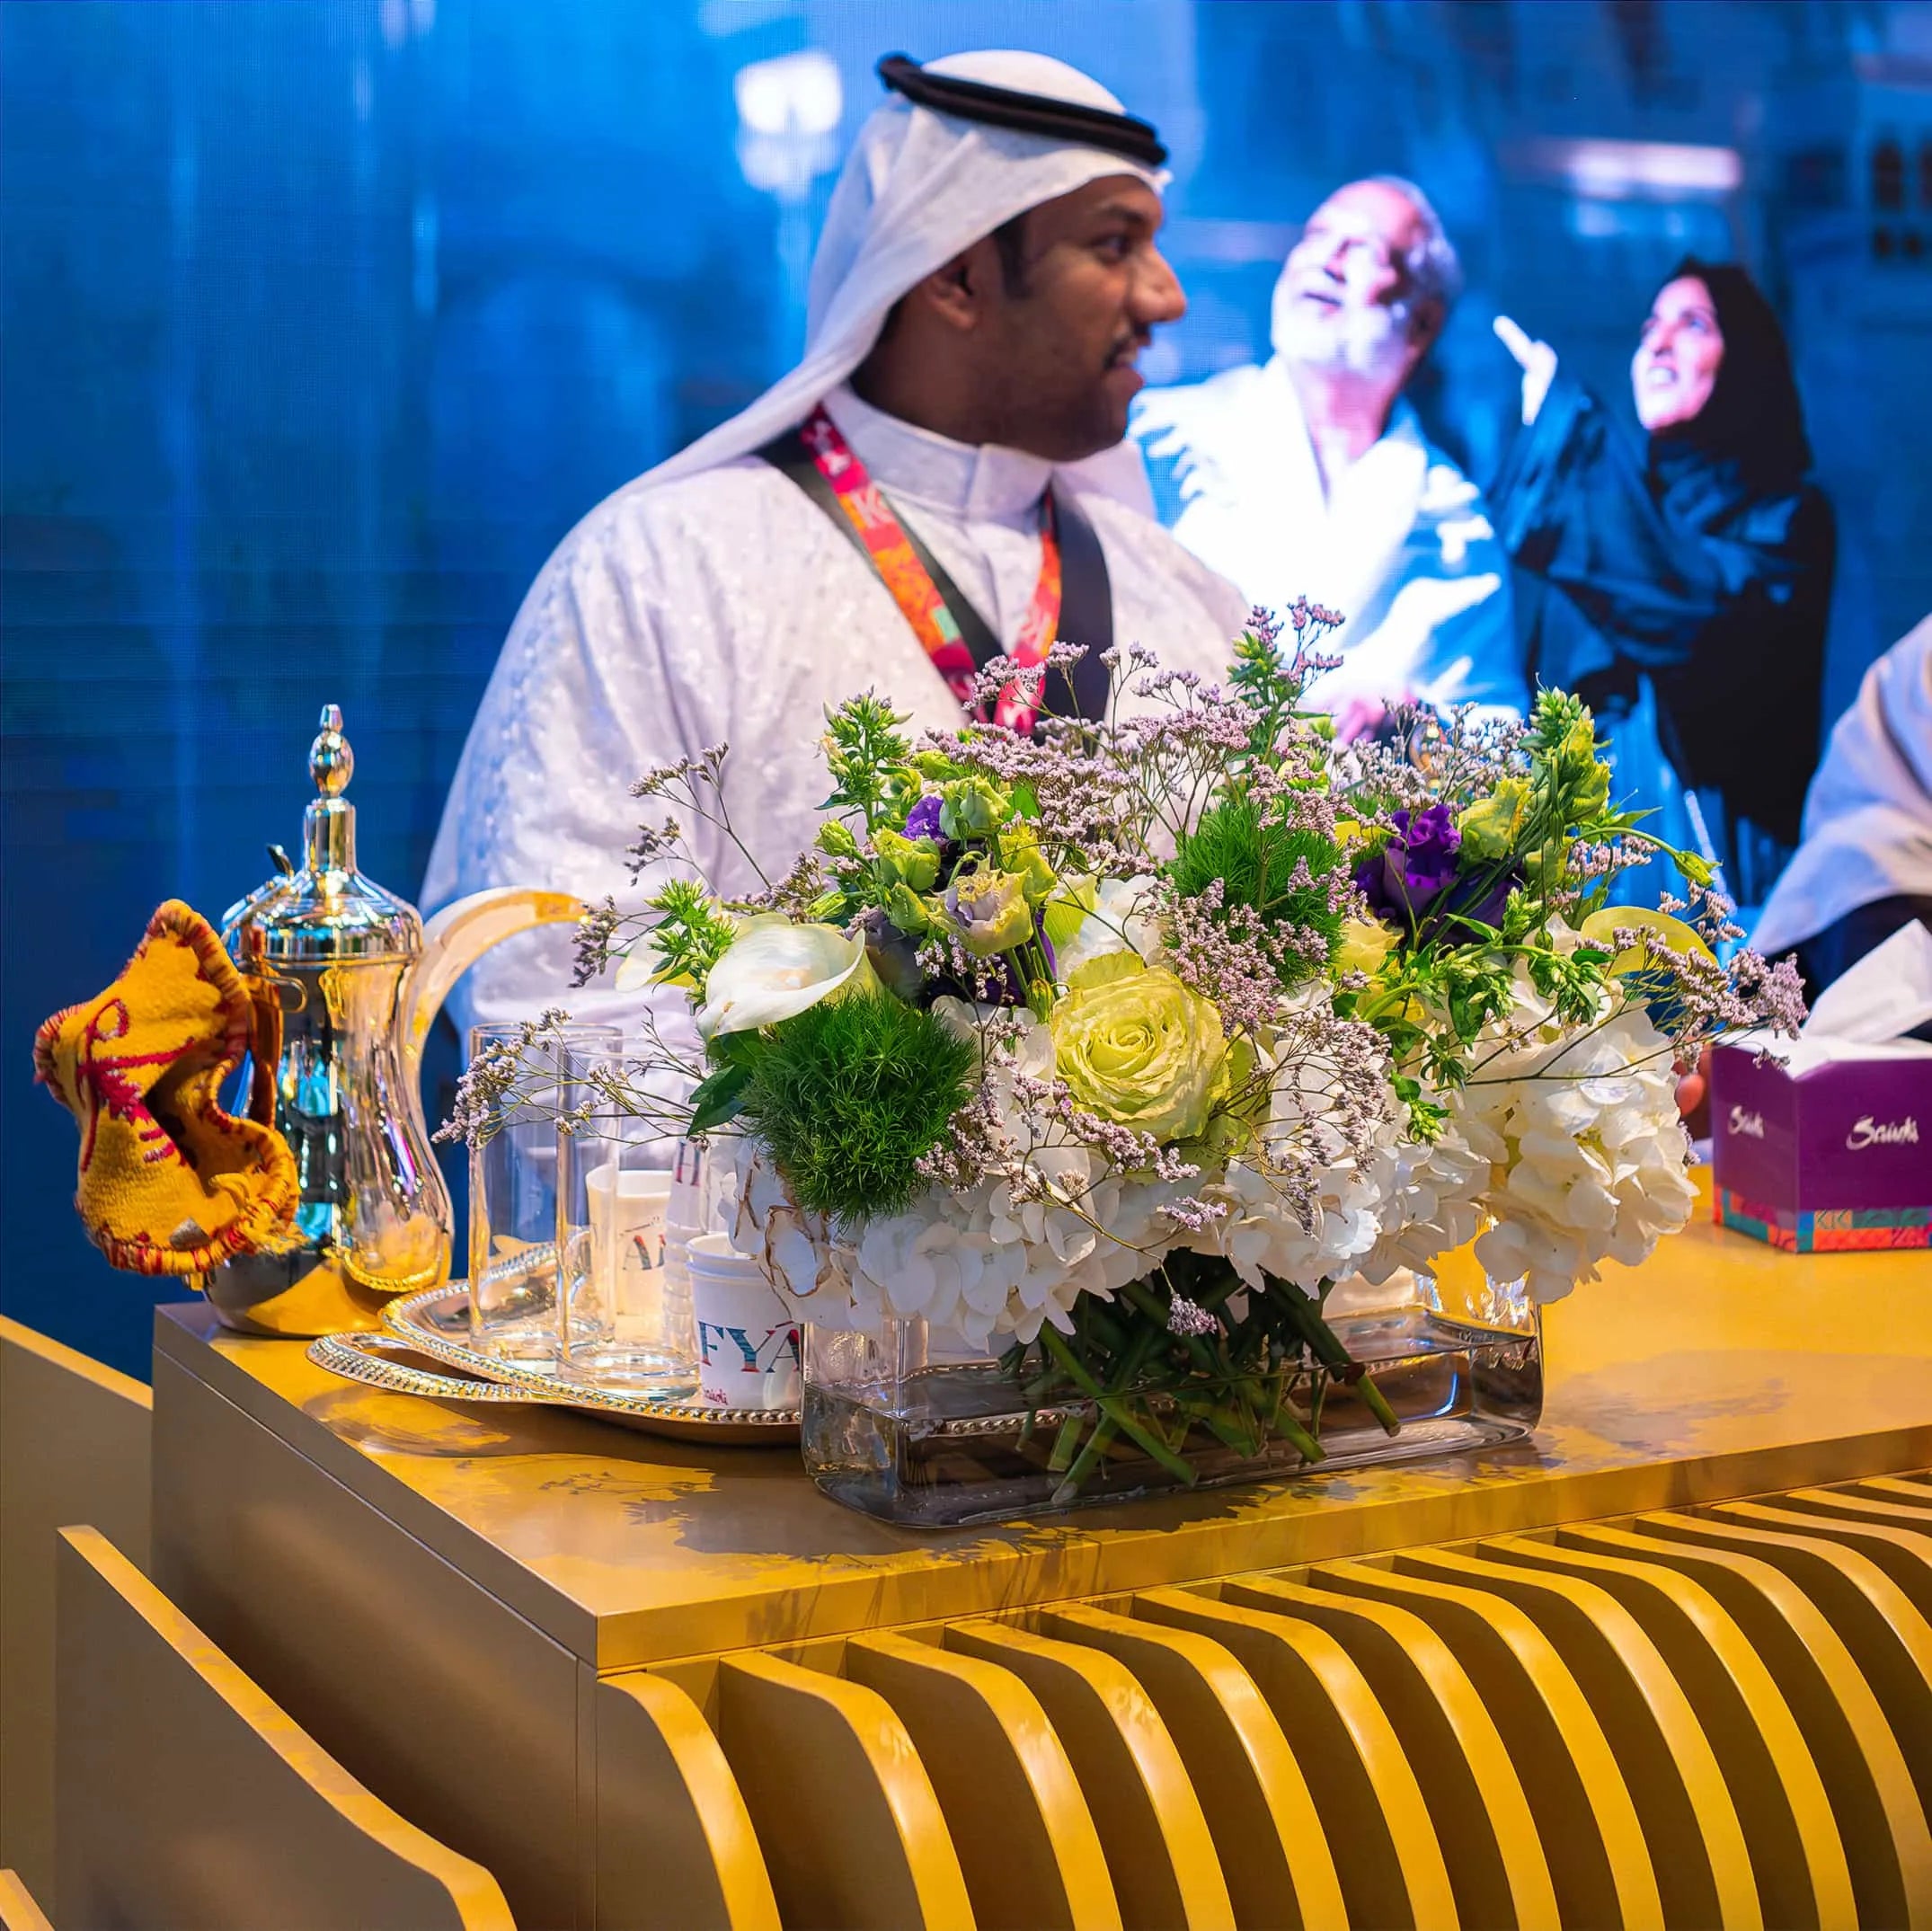 Luxurious mixed floral arrangement by Amaranté London at WTM, with a traditional Arabic coffee set, infusing cultural elegance.